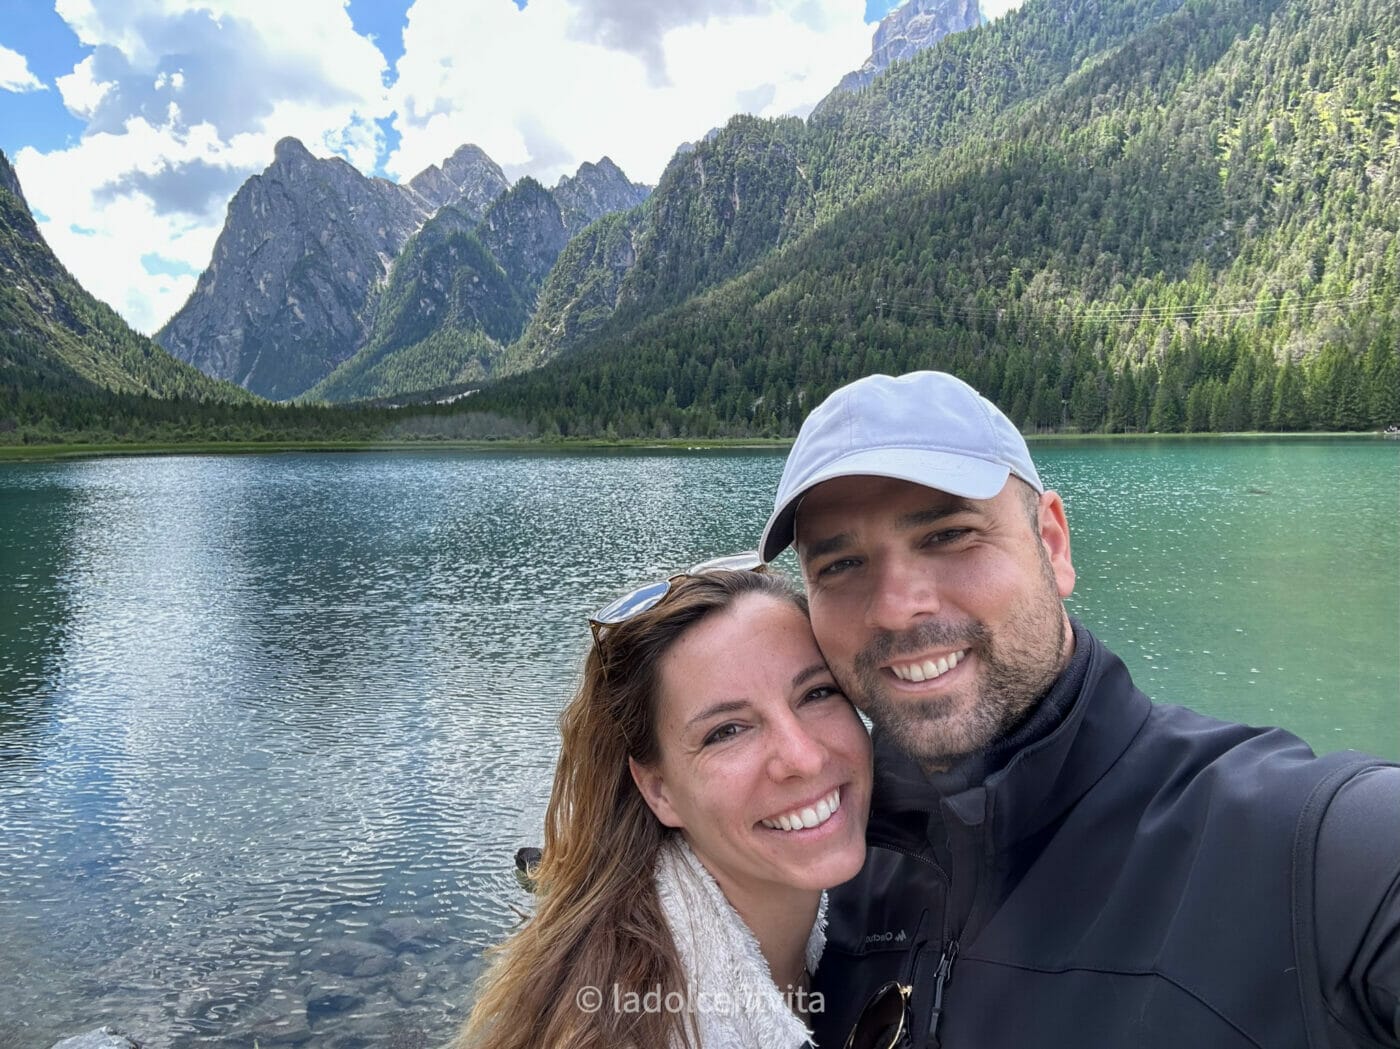 a couple posing for a selfie with mountains and lago di dobbiaco in the background